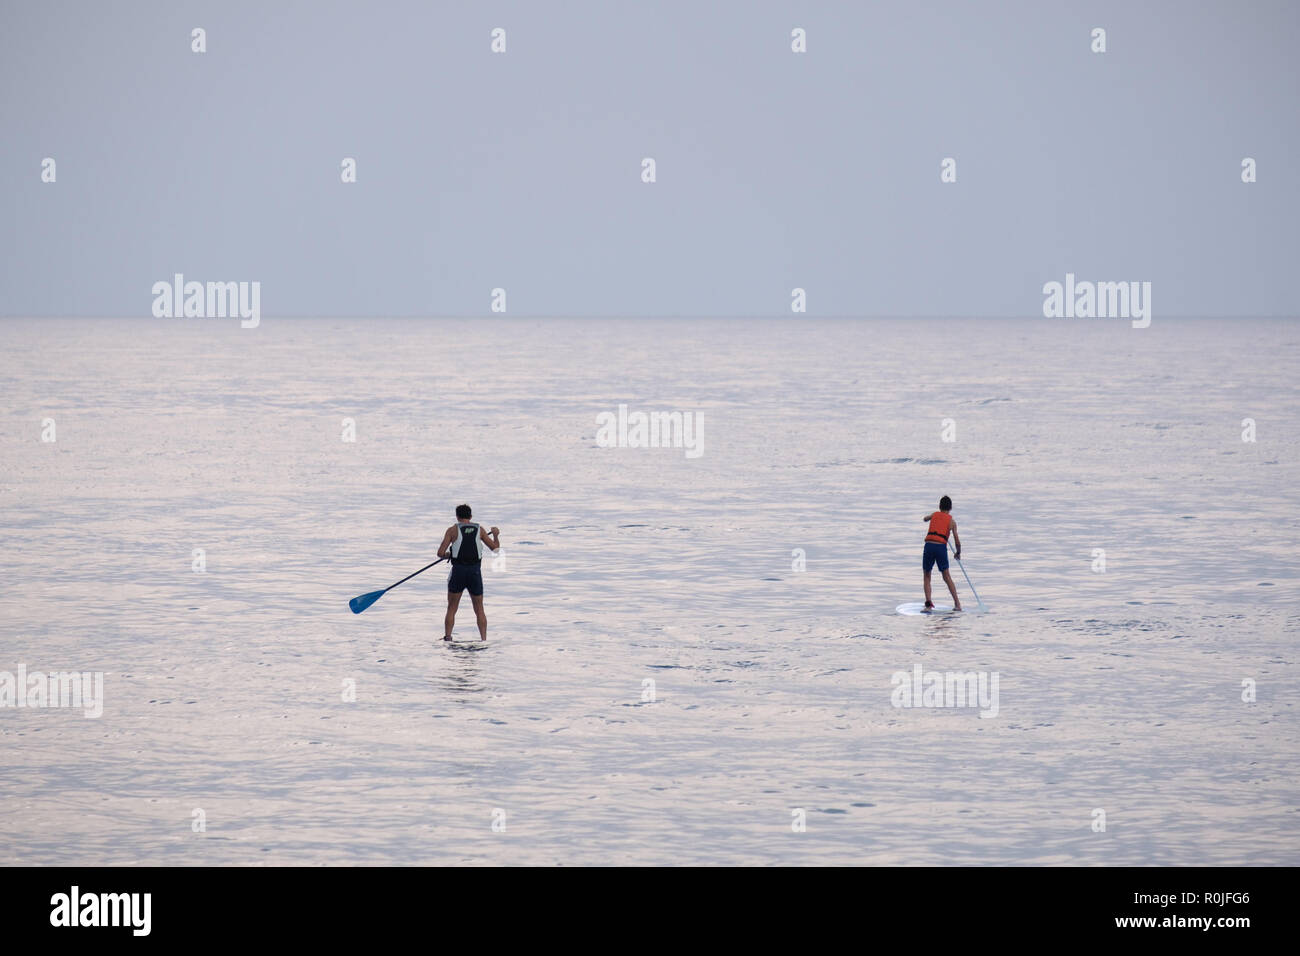 Stand up paddle boarding Stock Photo